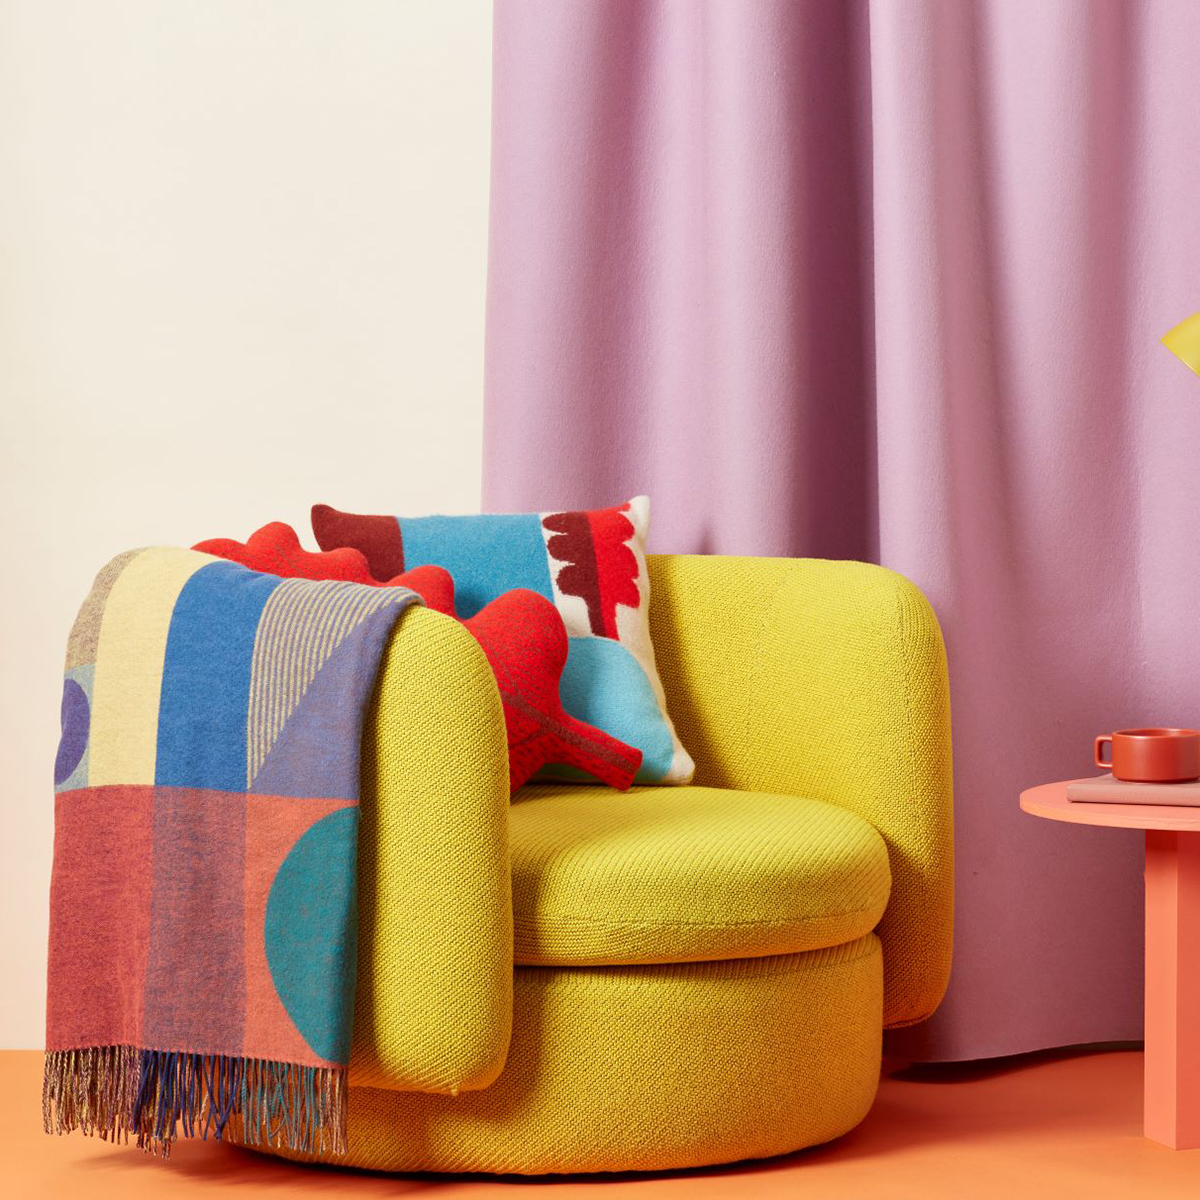 Colour lover and Interior designer Sophie Robinson looks at ways of boosting the mood in your home through colour. Adding accents of bright colours like a yellow armchair and accessorising with patterned throws and cushions will instantly brighten the mood. #colourlover #sophierobinson